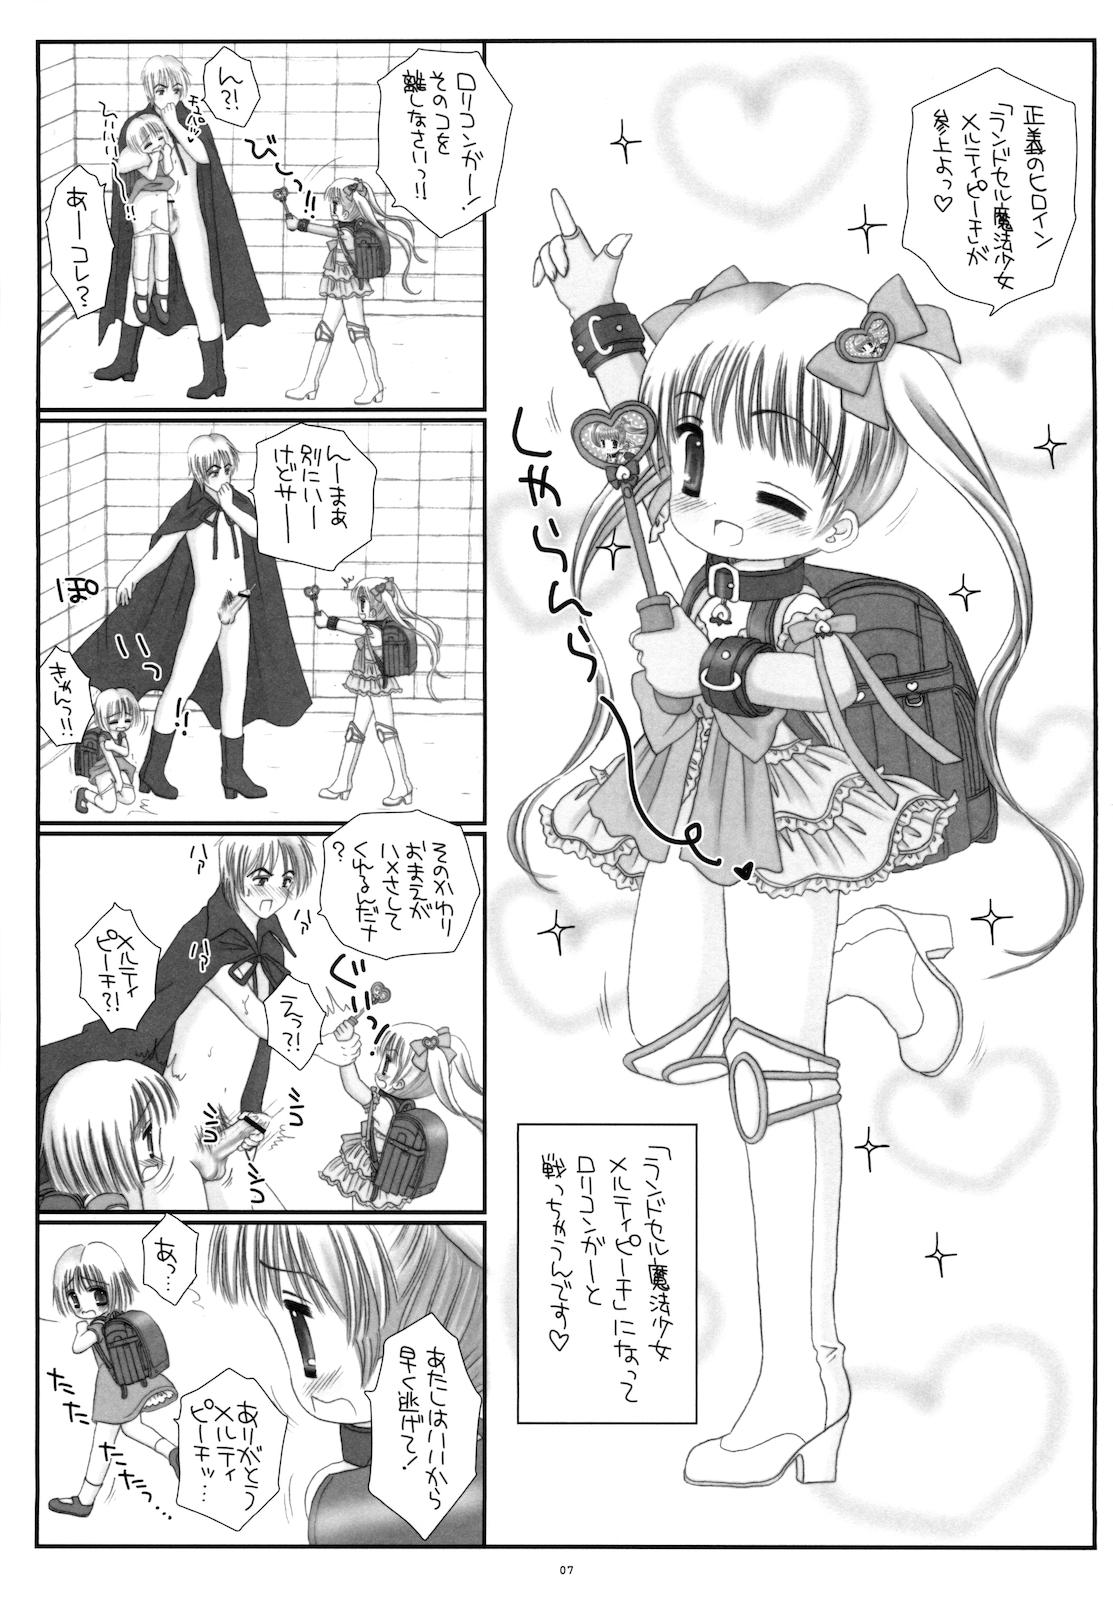 Sex Pussy Round Shell Mahou Shoujo Melty Peach Show - Page 9